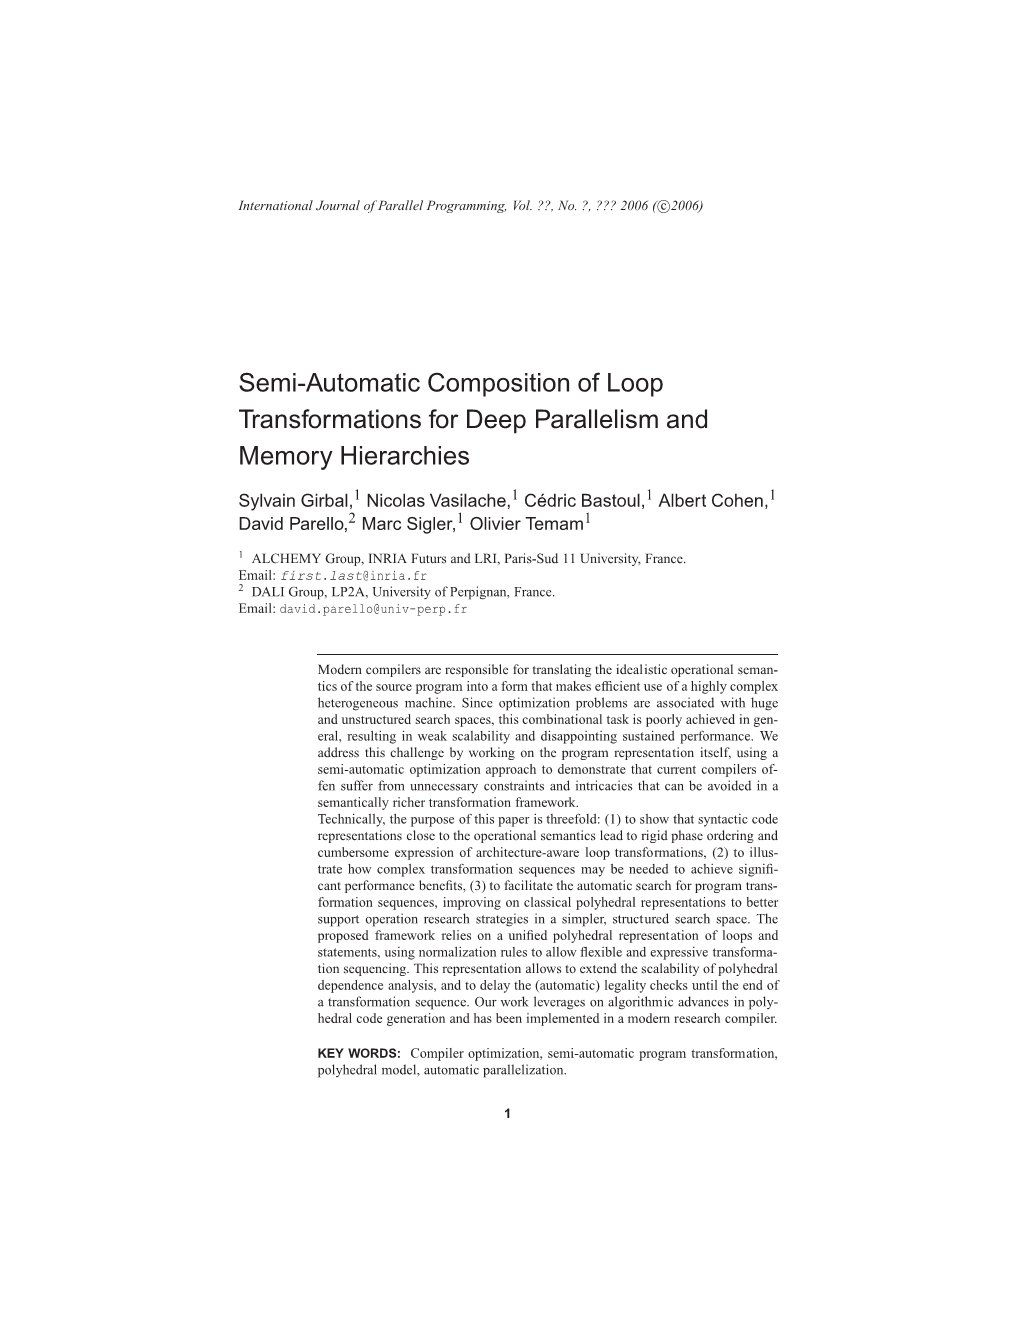 Semi-Automatic Composition of Loop Transformations for Deep Parallelism and Memory Hierarchies